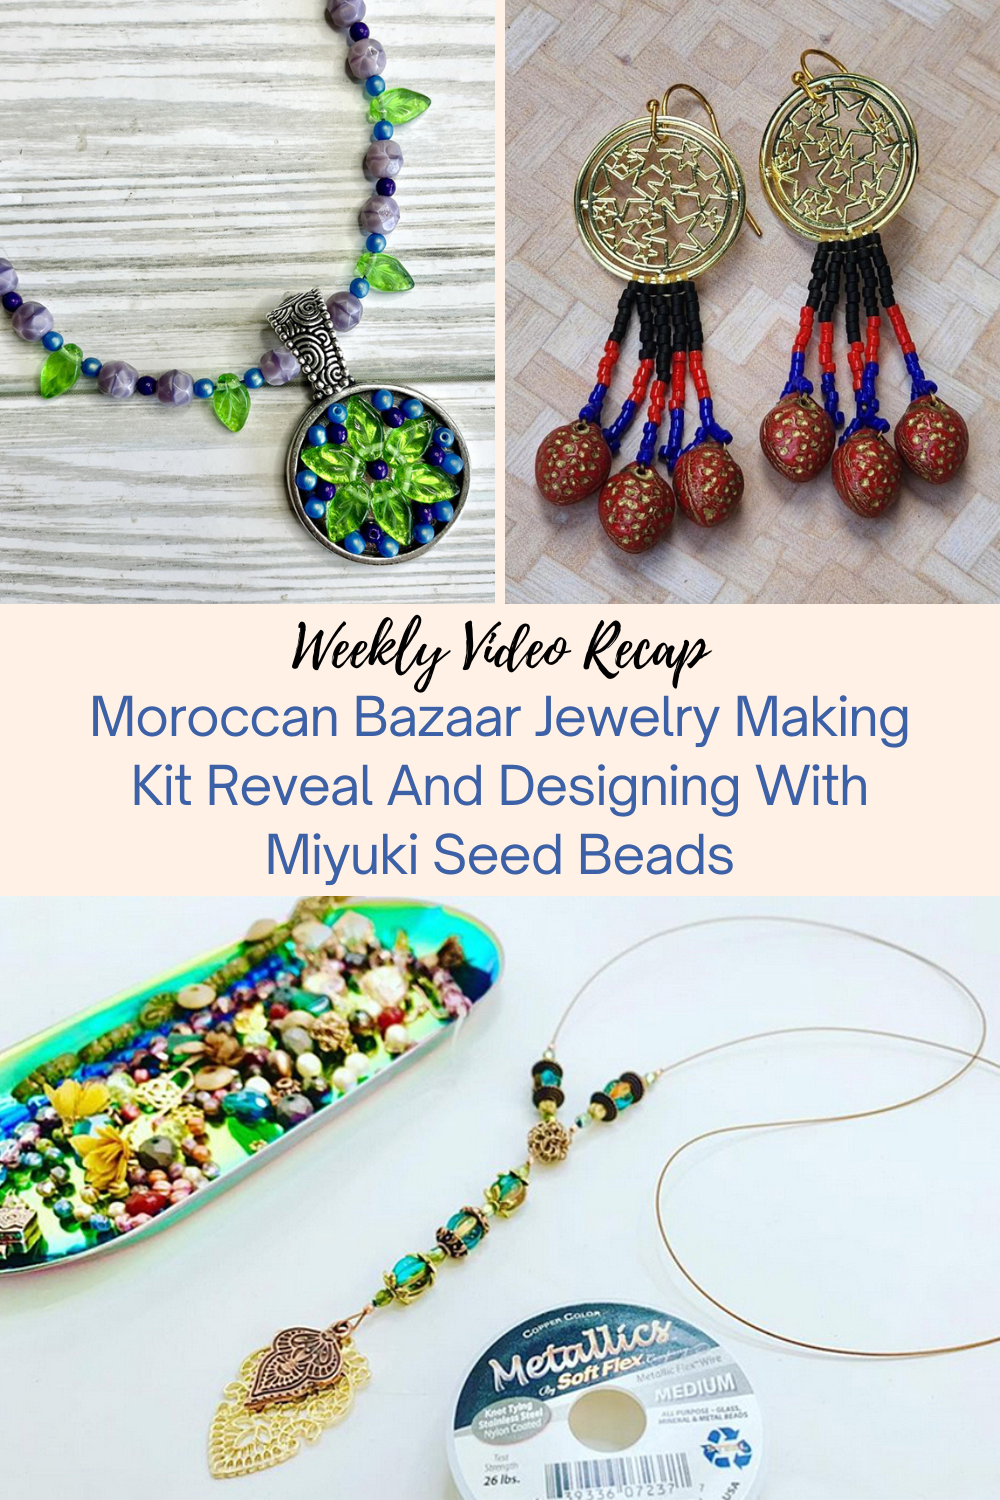 Moroccan Bazaar Jewelry Making Kit Reveal And Designing With Miyuki Seed Beads Collage